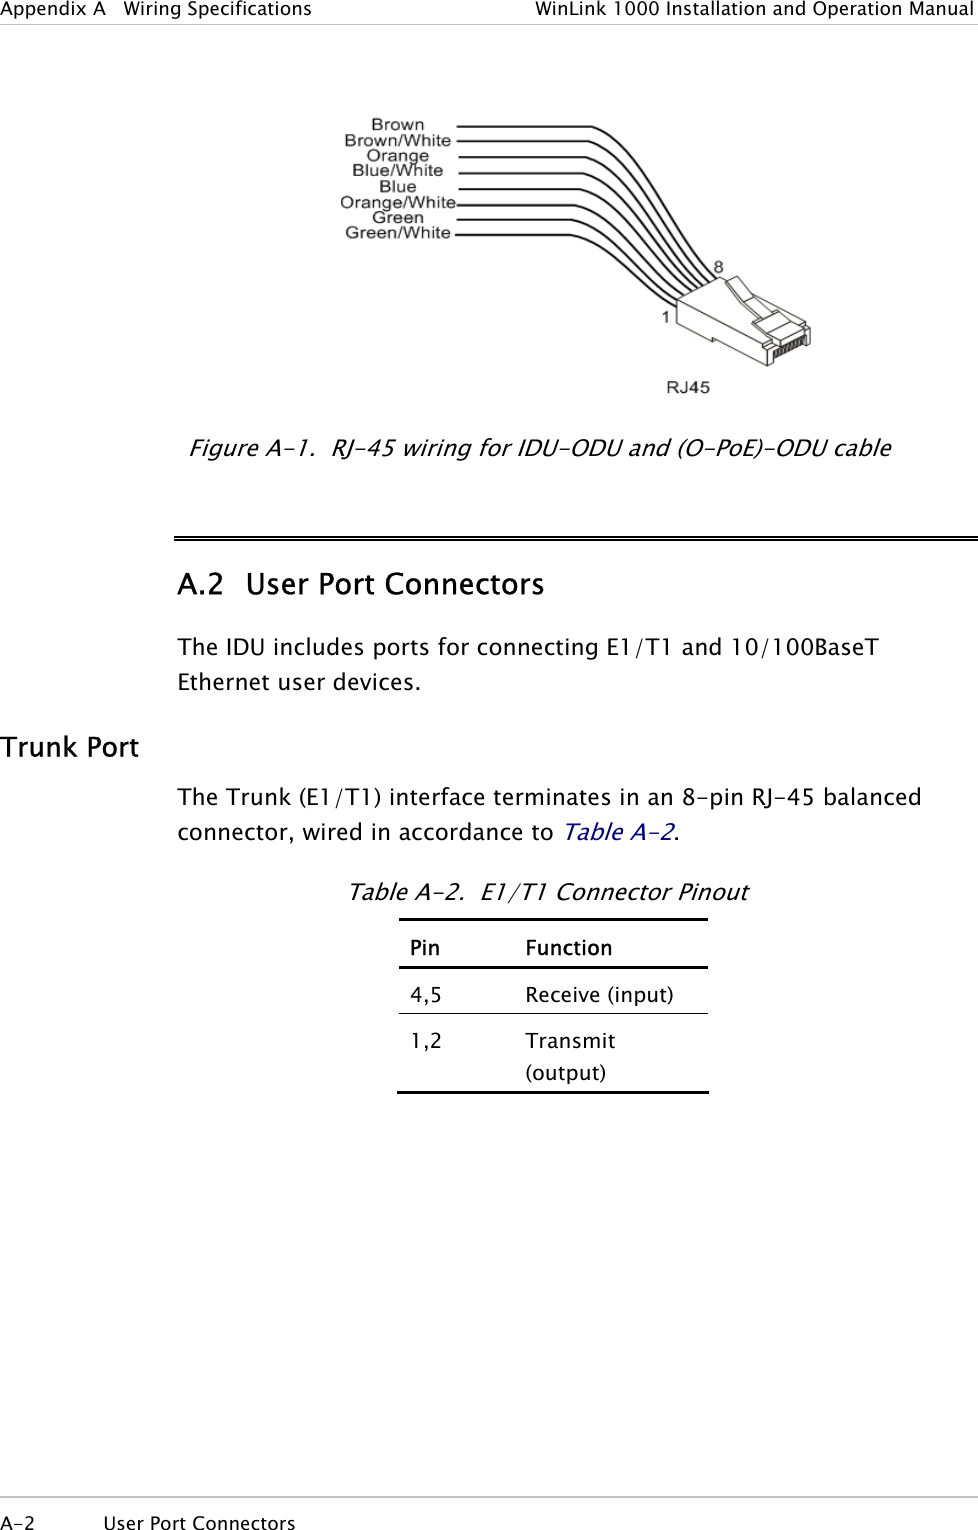 Appendix A   Wiring Specifications  WinLink 1000 Installation and Operation Manual    Figure  A-1.  RJ-45 wiring for IDU-ODU and (O-PoE)-ODU cable A.2  User Port Connectors The IDU includes ports for connecting E1/T1 and 10/100BaseT Ethernet user devices. Trunk Port The Trunk (E1/T1) interface terminates in an 8-pin RJ-45 balanced connector, wired in accordance to Table  A-2. Table  A-2.  E1/T1 Connector Pinout Pin   Function 4,5 Receive (input) 1,2 Transmit (output)      A-2  User Port Connectors   